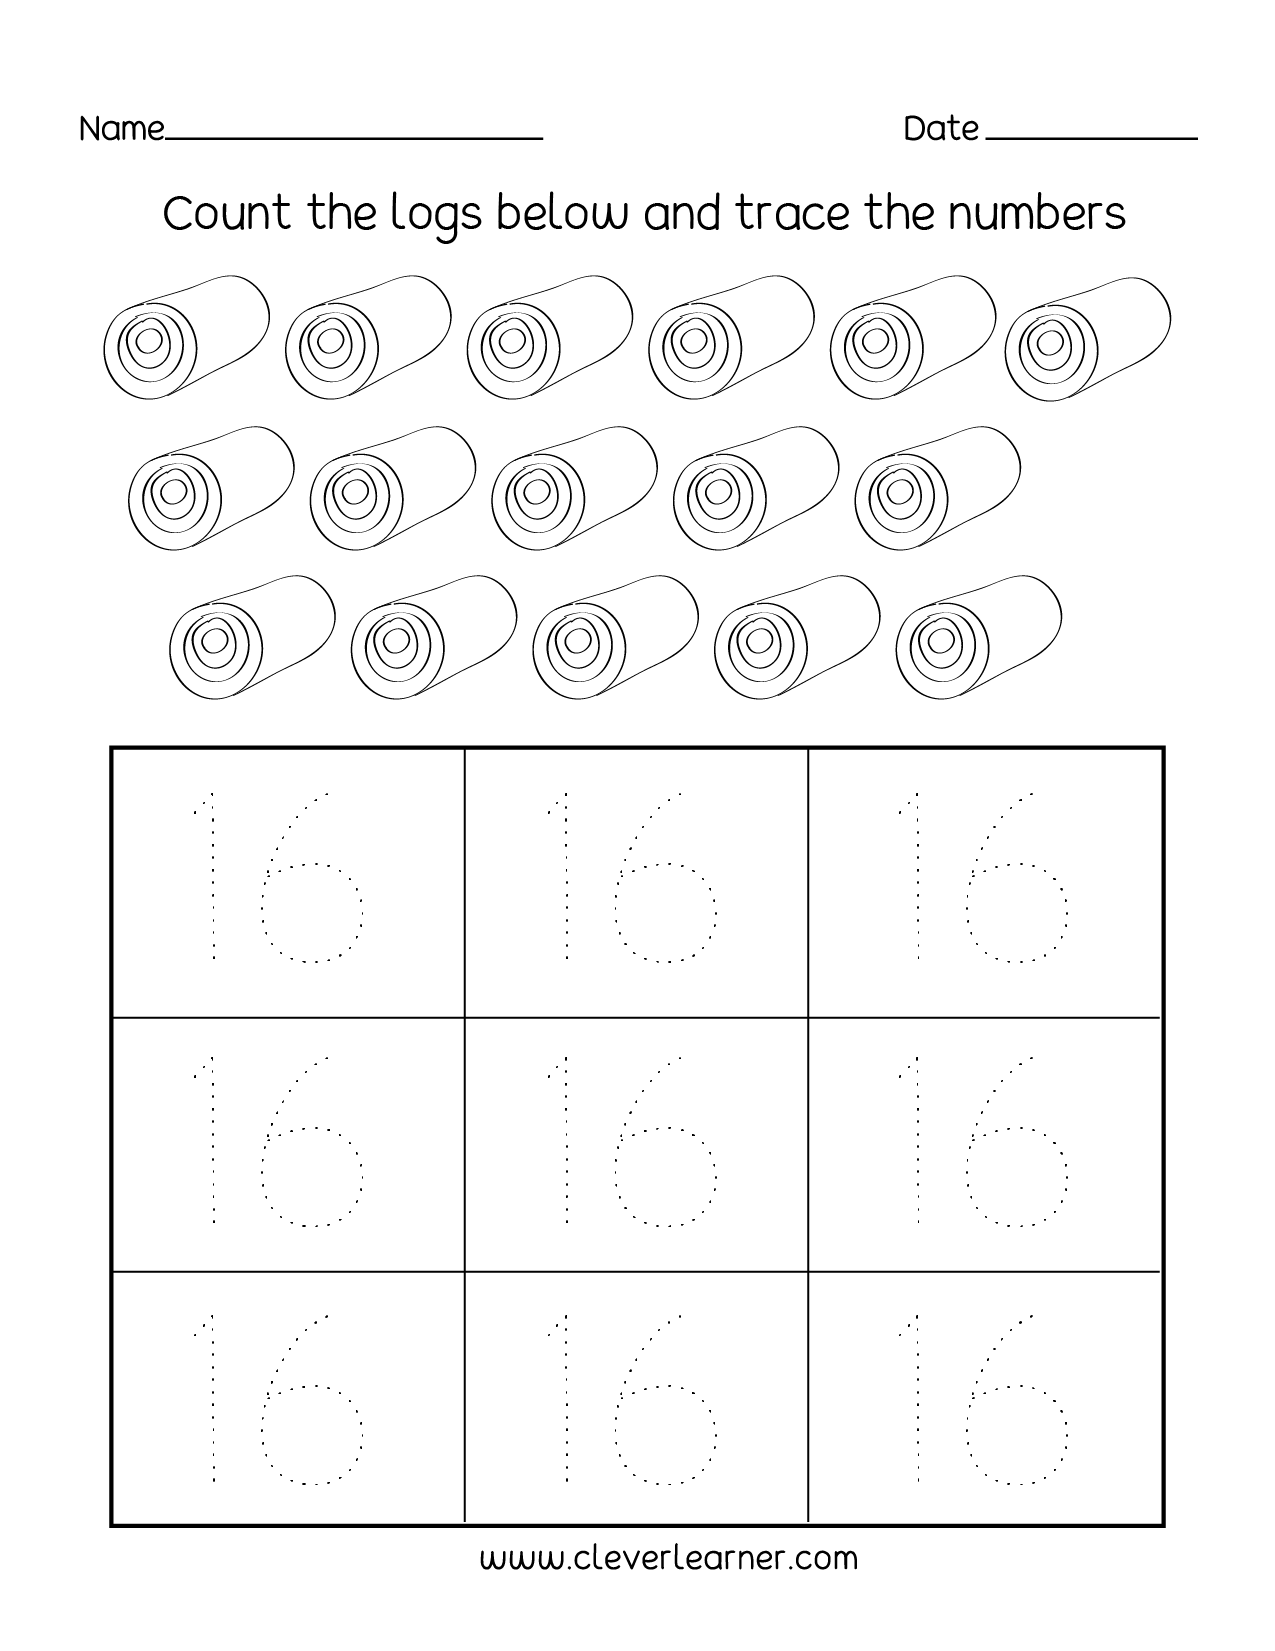 Number 16 Writing Counting And Identification Printable Worksheets For Children